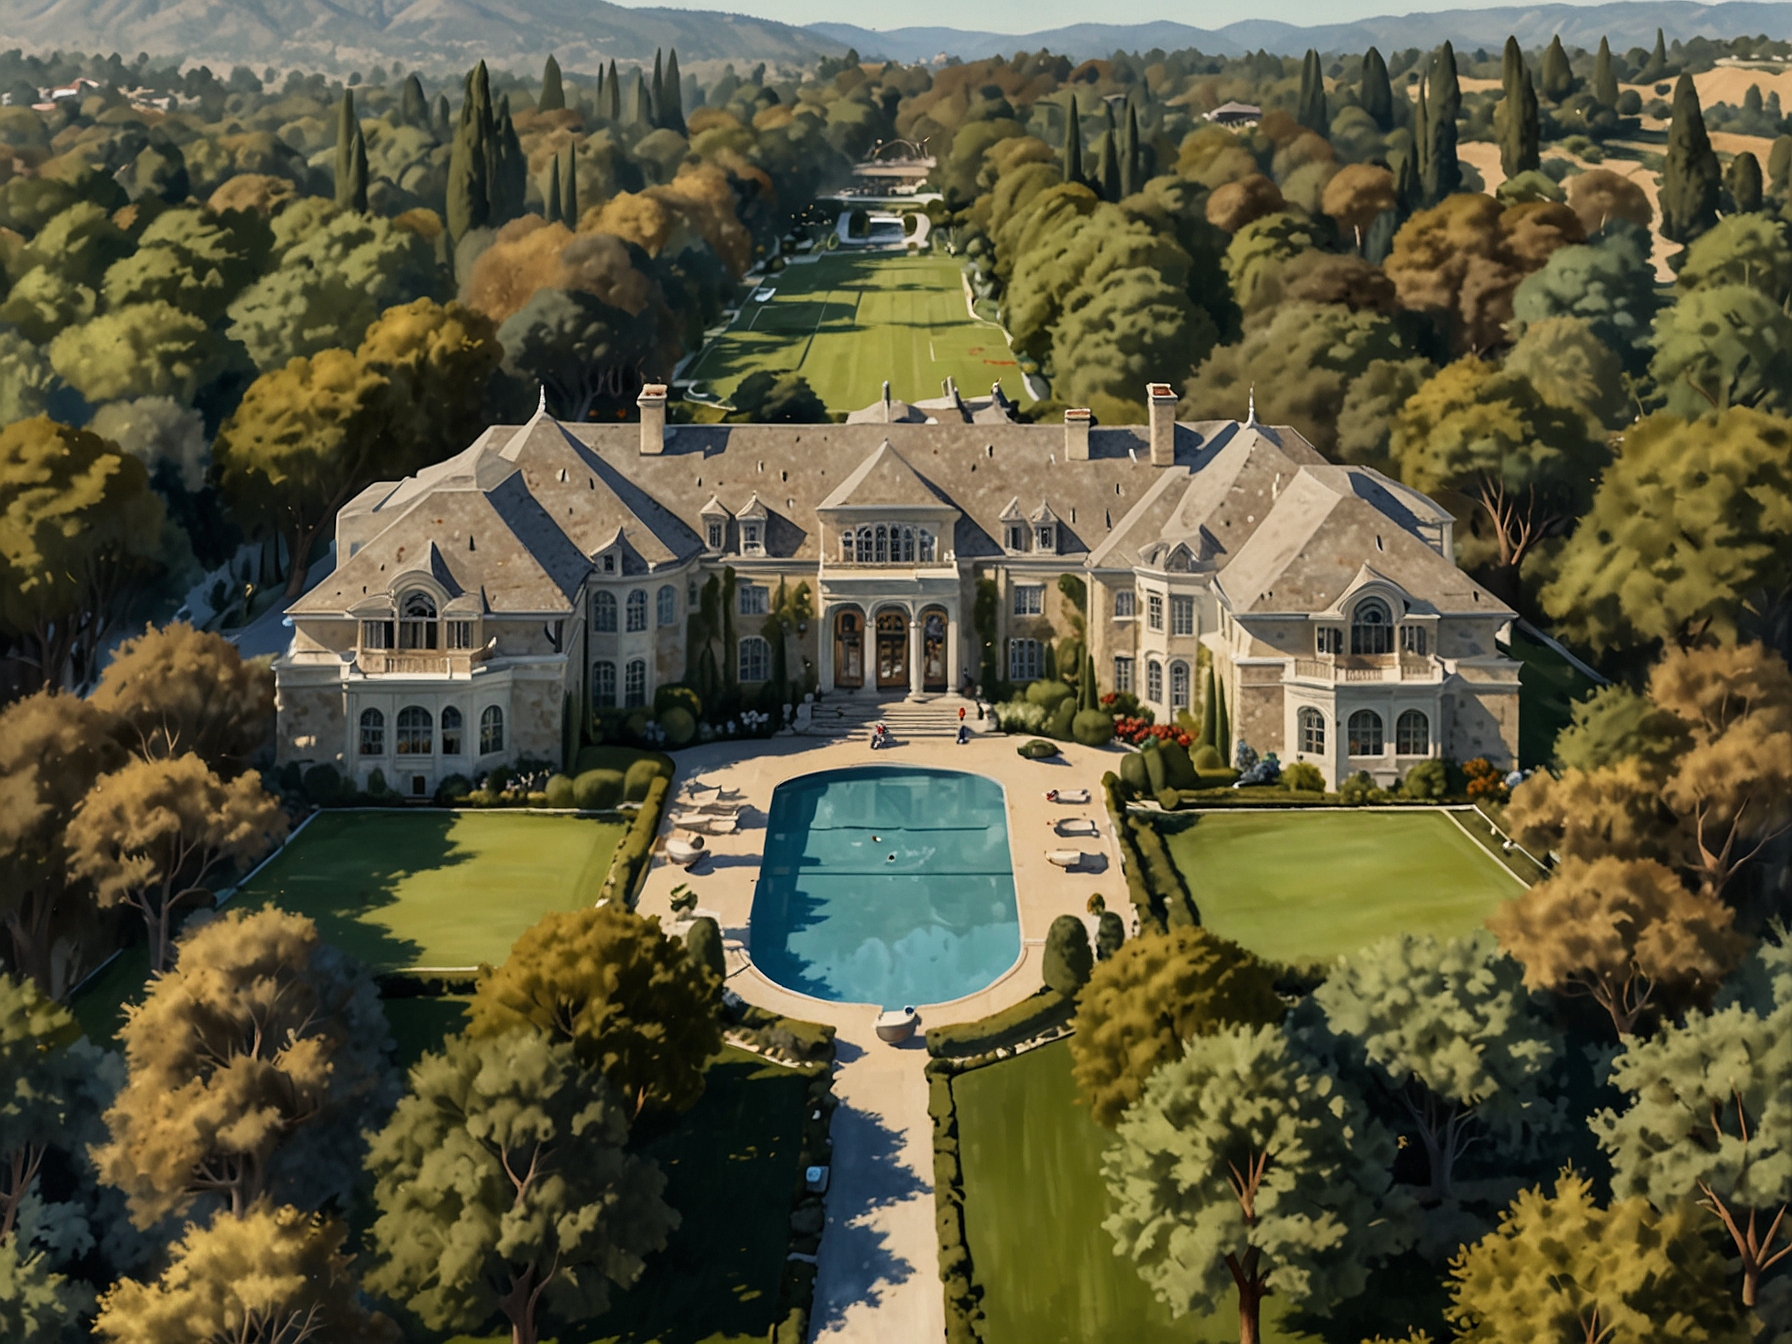 Aerial view of a sprawling Silicon Valley estate with landscaped gardens, swimming pool, tennis court, and luxury amenities, once owned by former Google CEO Eric Schmidt, sold for over $20 million.